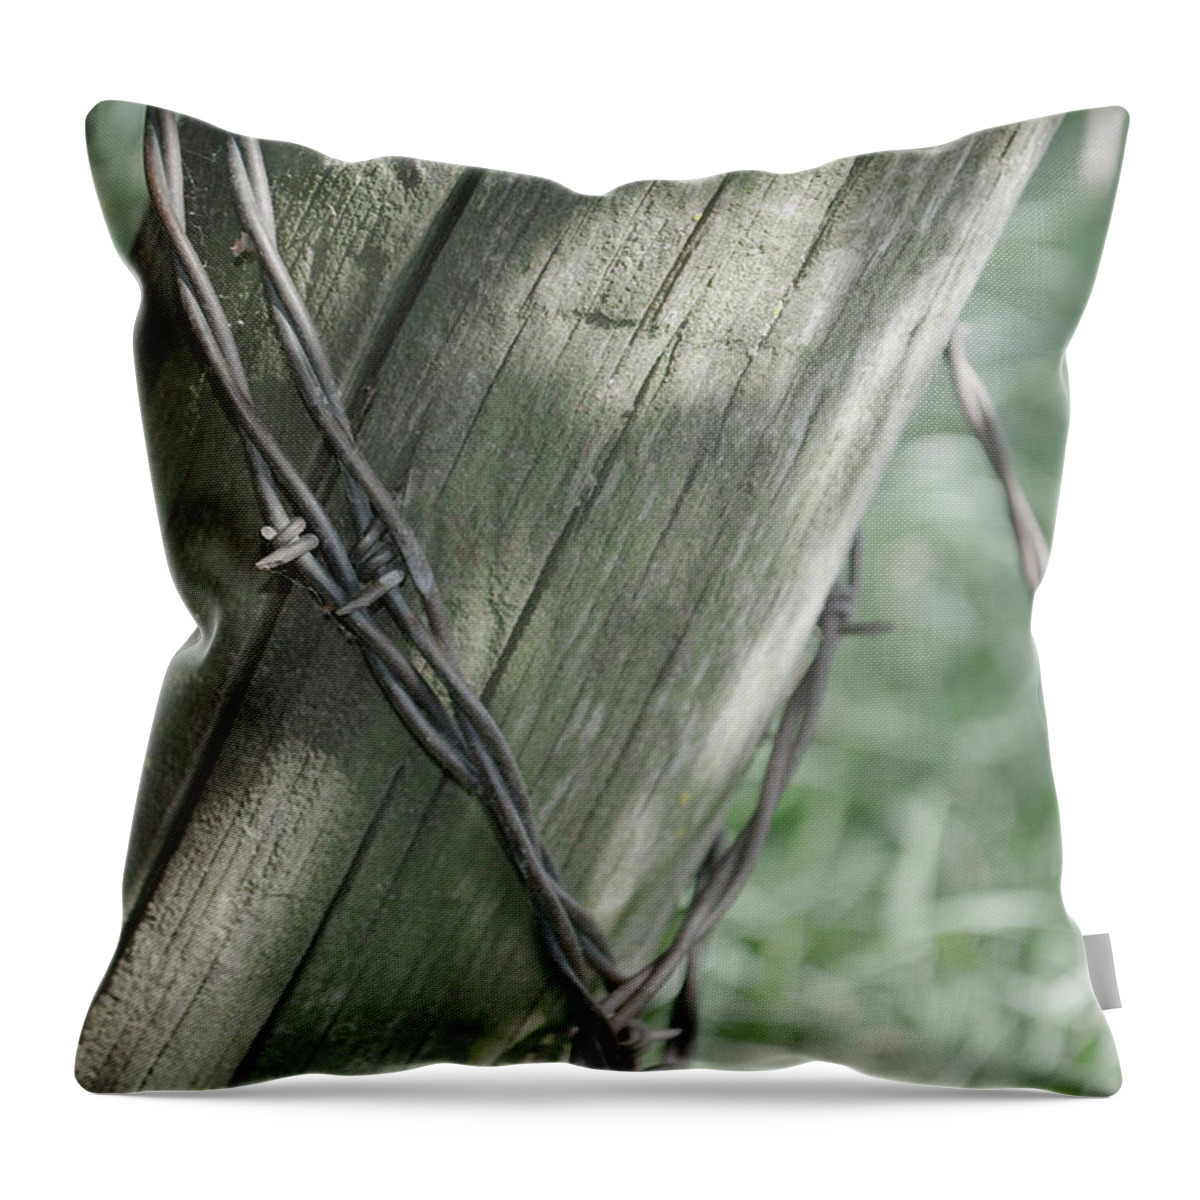 Barbwire Throw Pillow featuring the photograph Barbwire Shadow by Troy Stapek